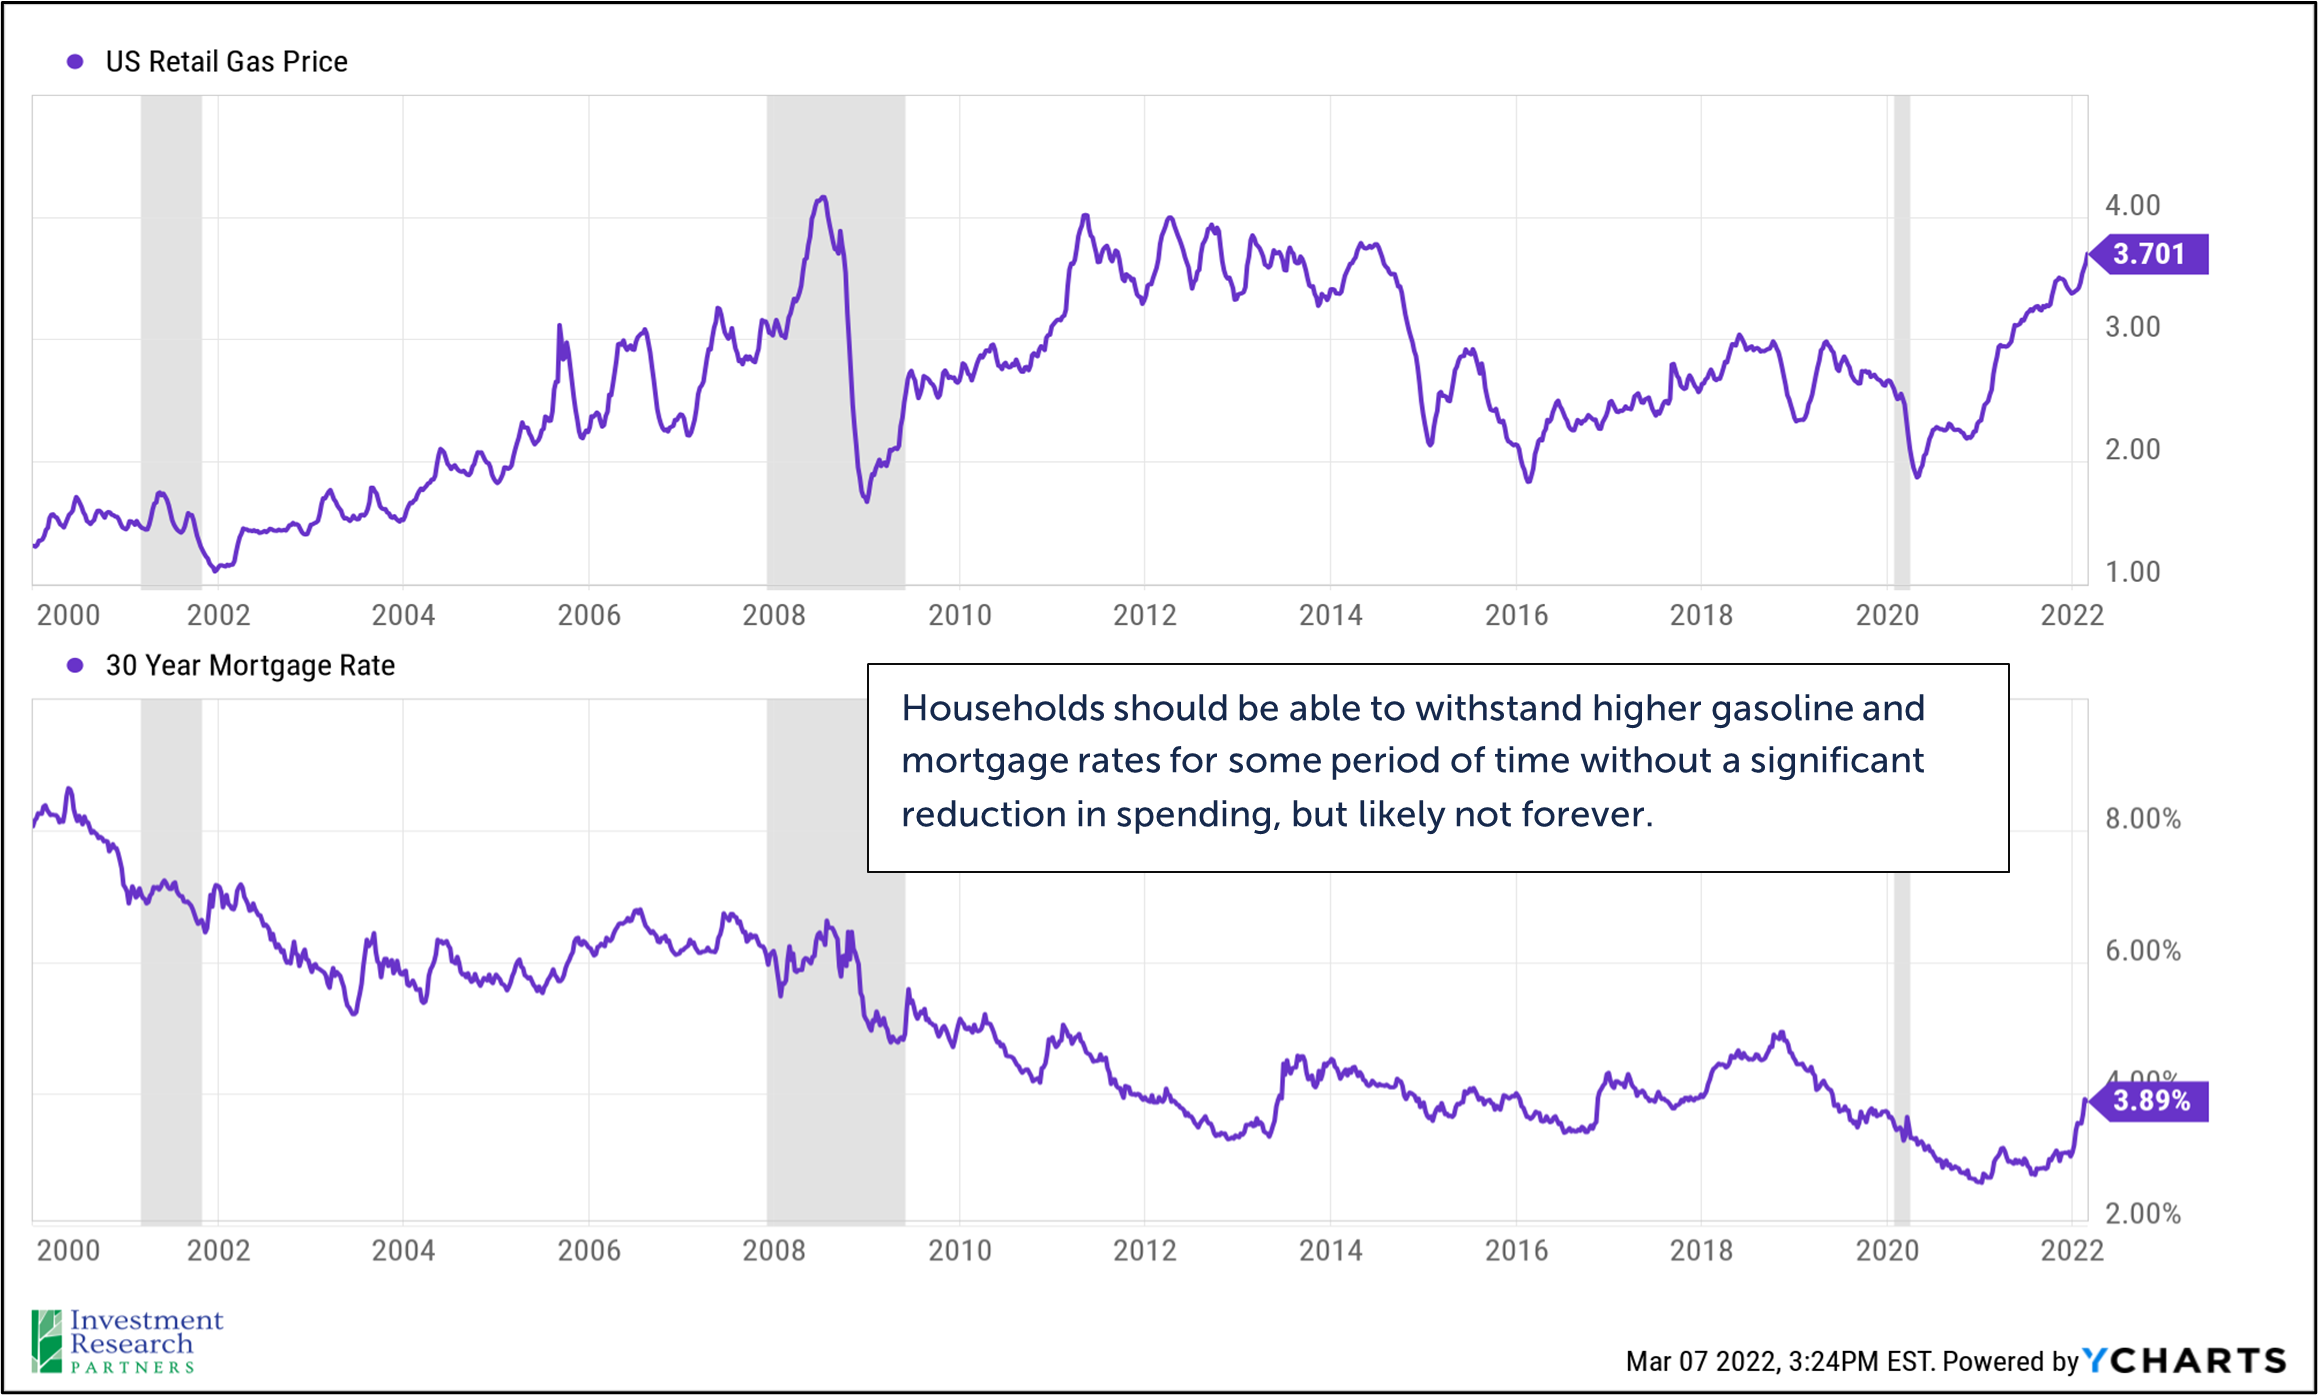 Line graphs depicting US Retail Gas Price and 30 Year Mortgage Rate